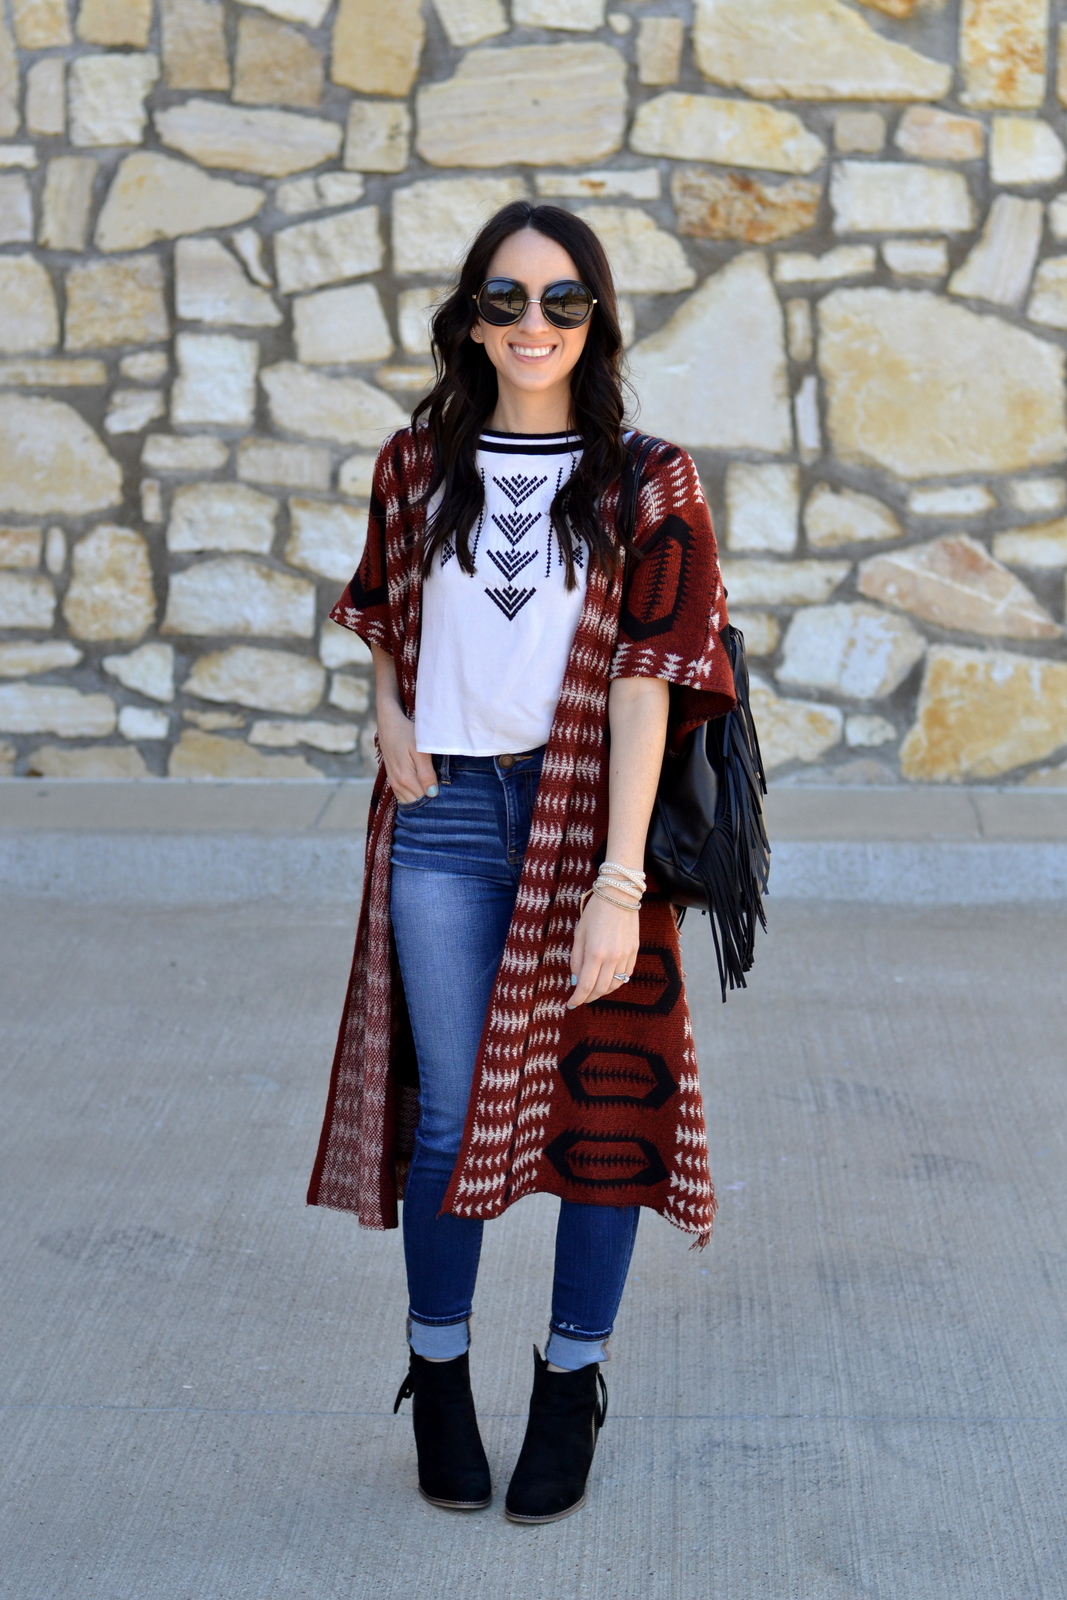 Festival Outfit wearing an aztec crop top and cardigan with a fringe bag 